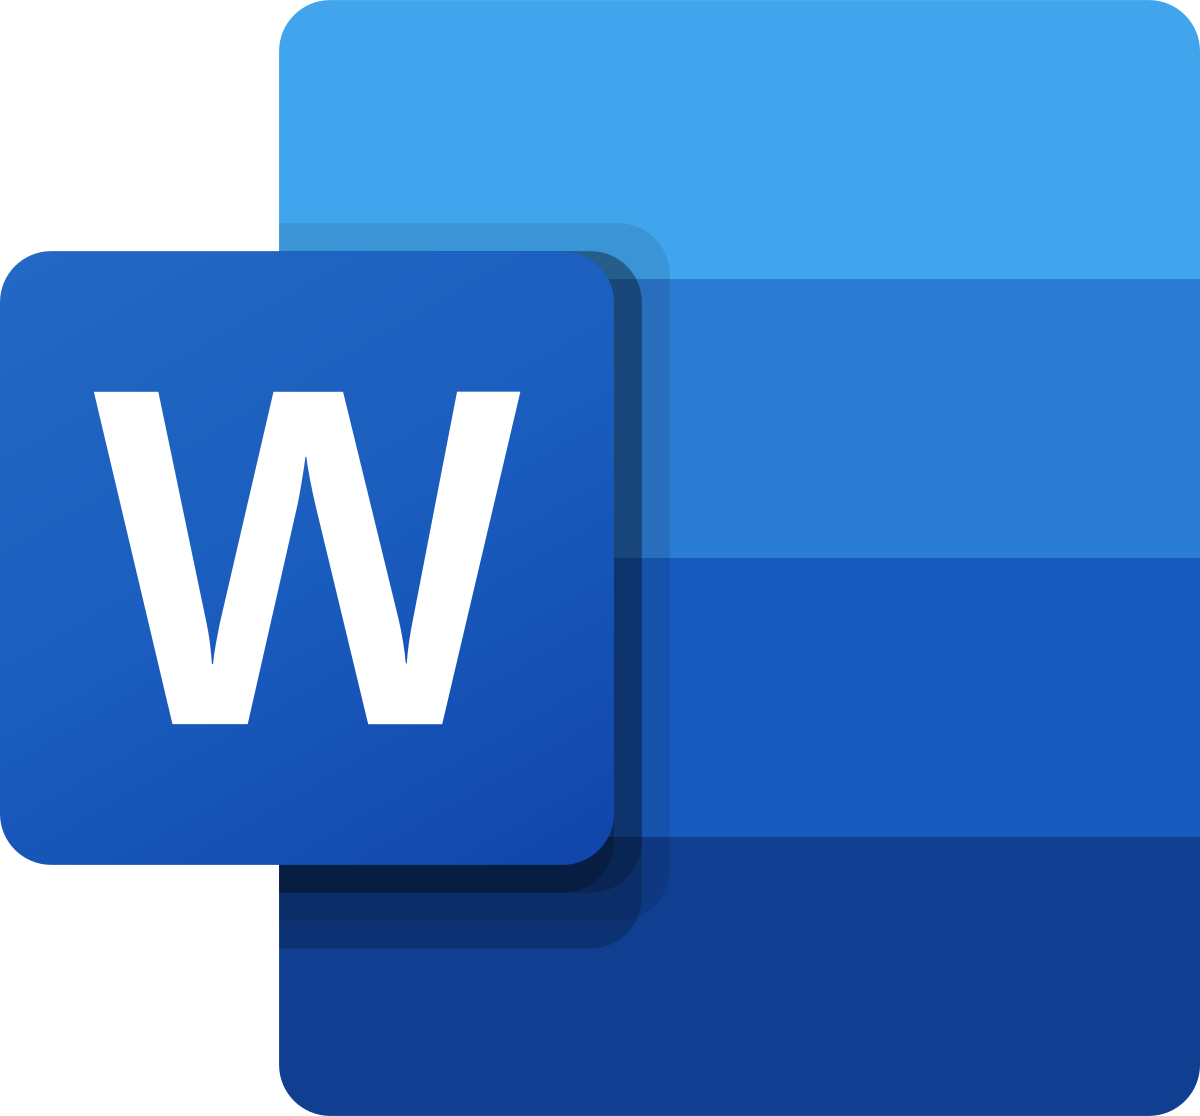 How to Get Microsoft Word 2017 for Free with Keygen?